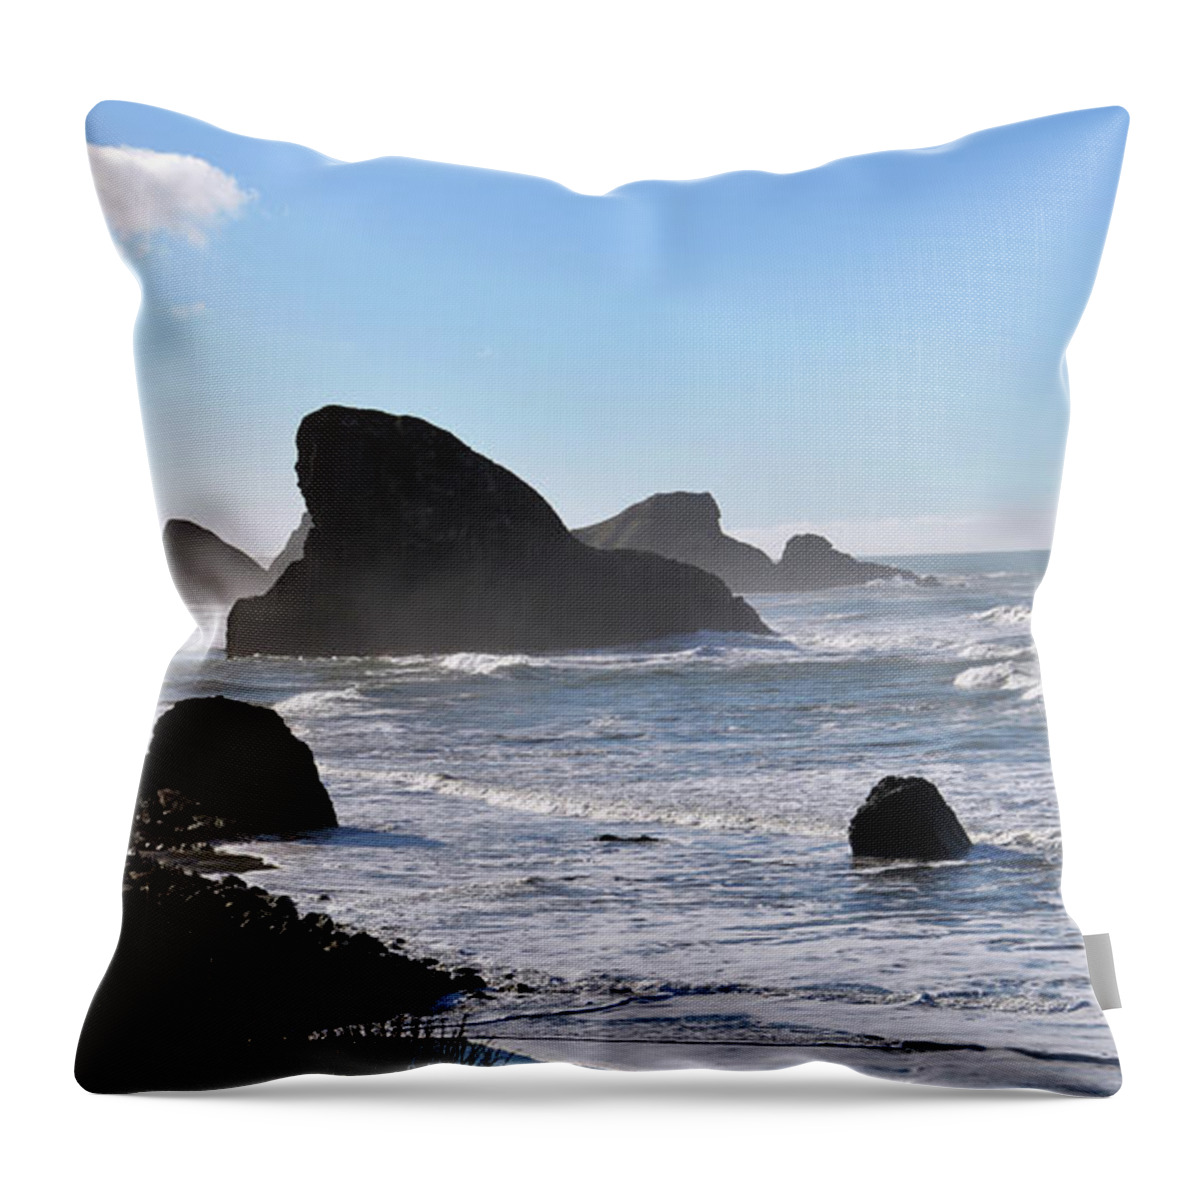 Denise Bruchman Photography Throw Pillow featuring the photograph The Oregon Coast by Denise Bruchman